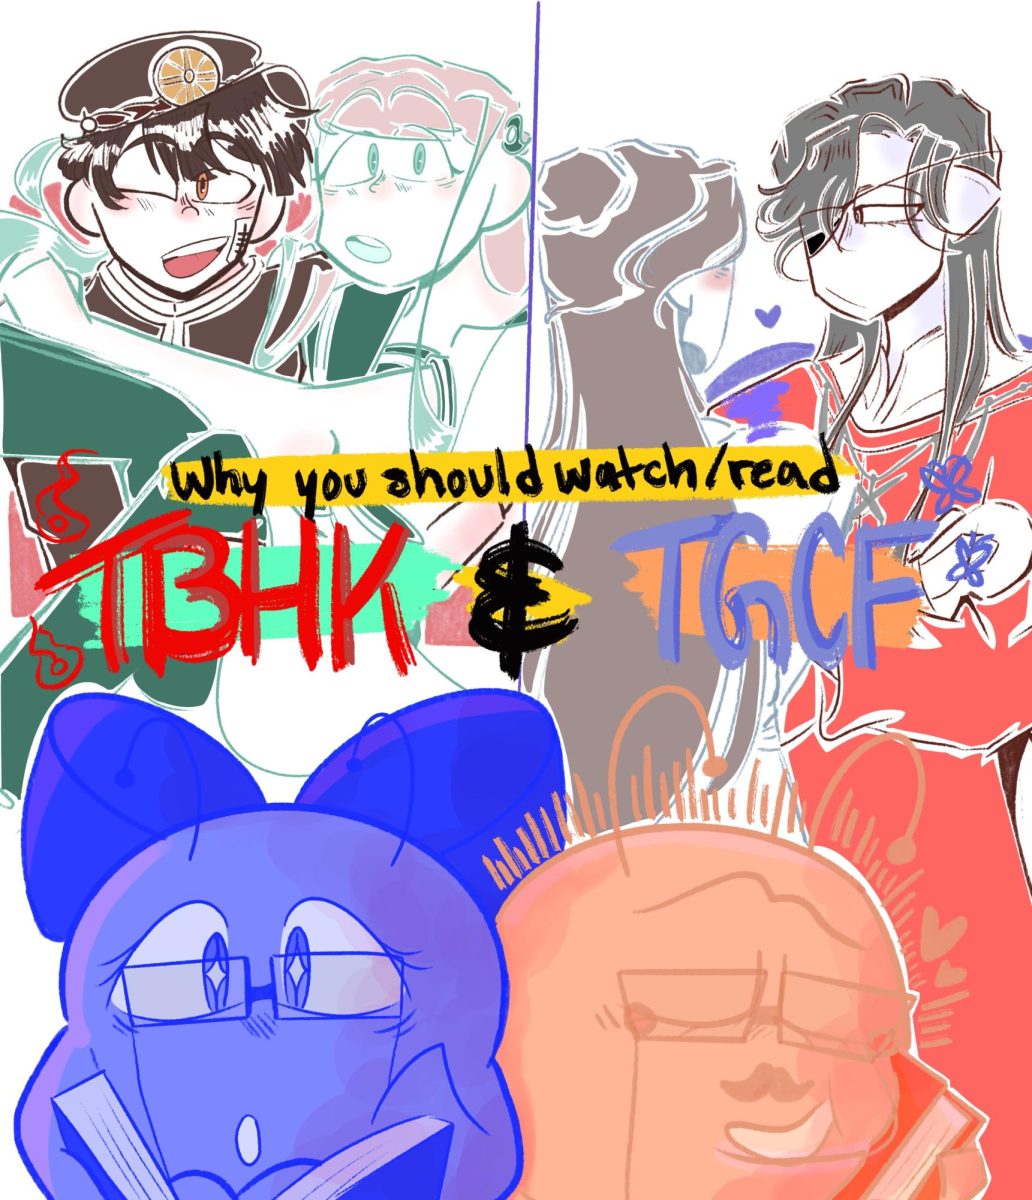 Why you should watch TBHK and TGCF